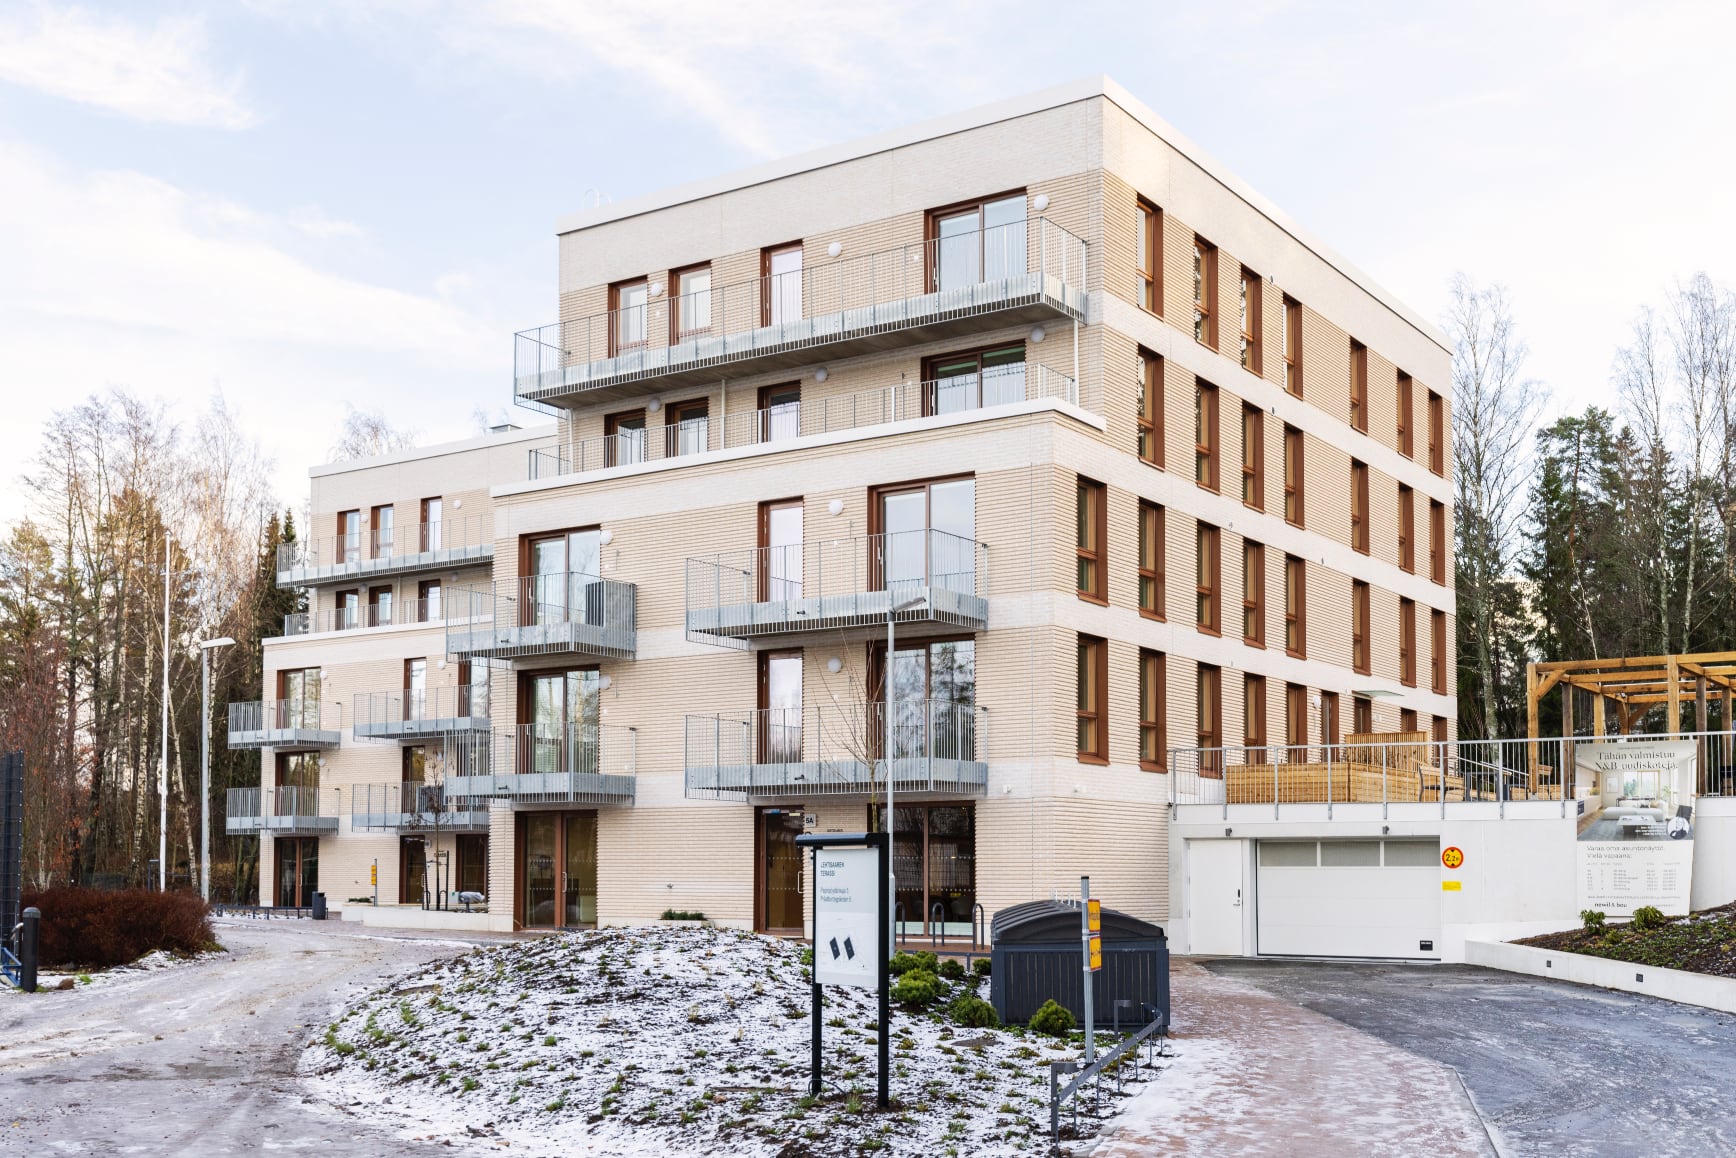 The architecturally ambitious residential block by Ted Schauman and Newil&Bau has been completed in Lehtisaari